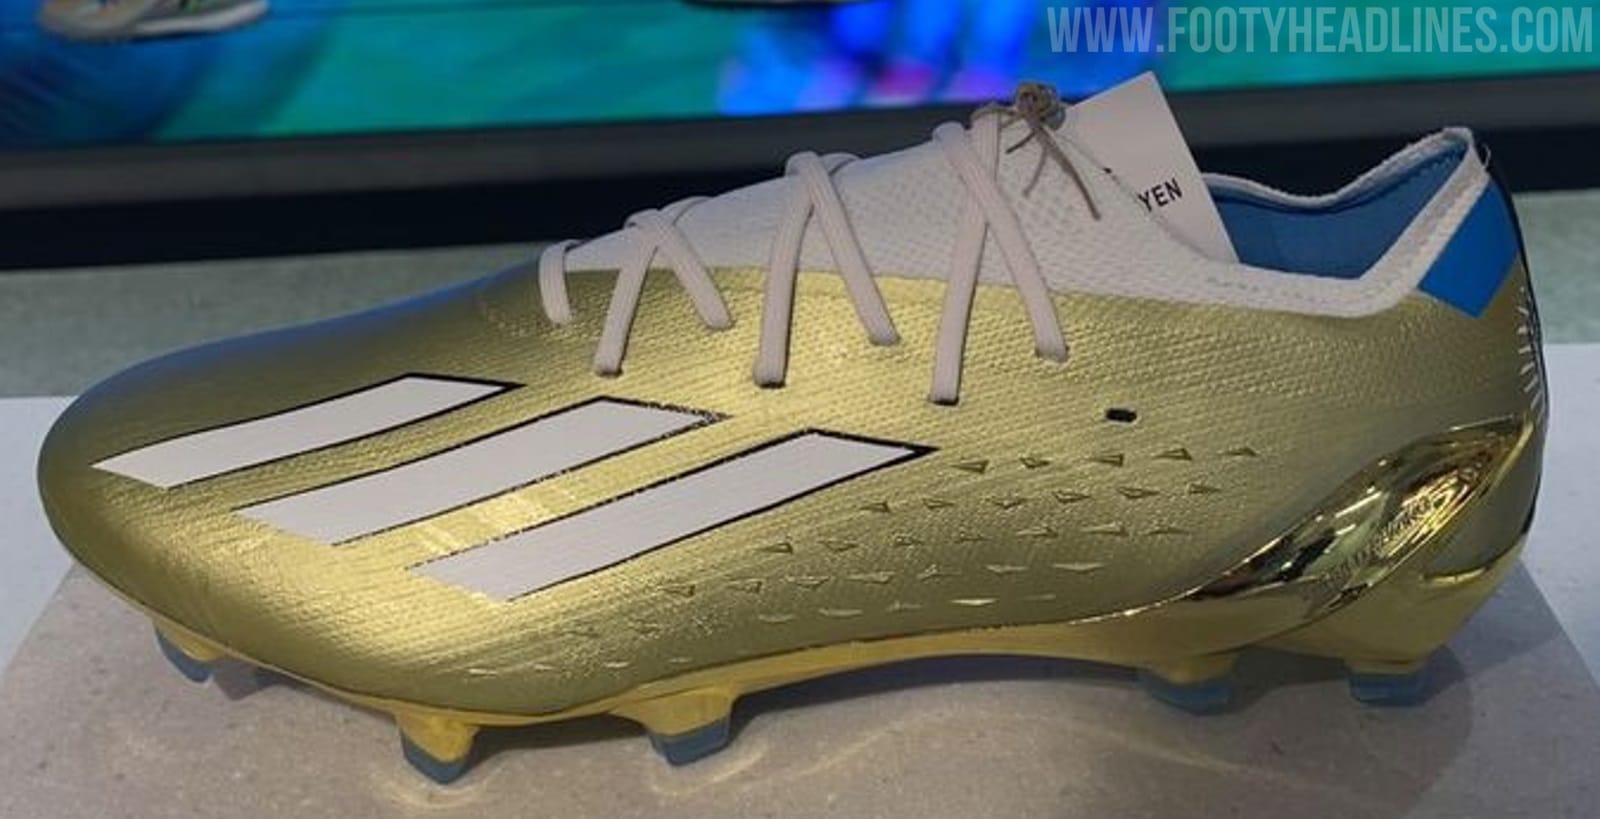 Messi's World Boots: Lionel Messi's from Adidas for upcoming FIFA Cup revealed